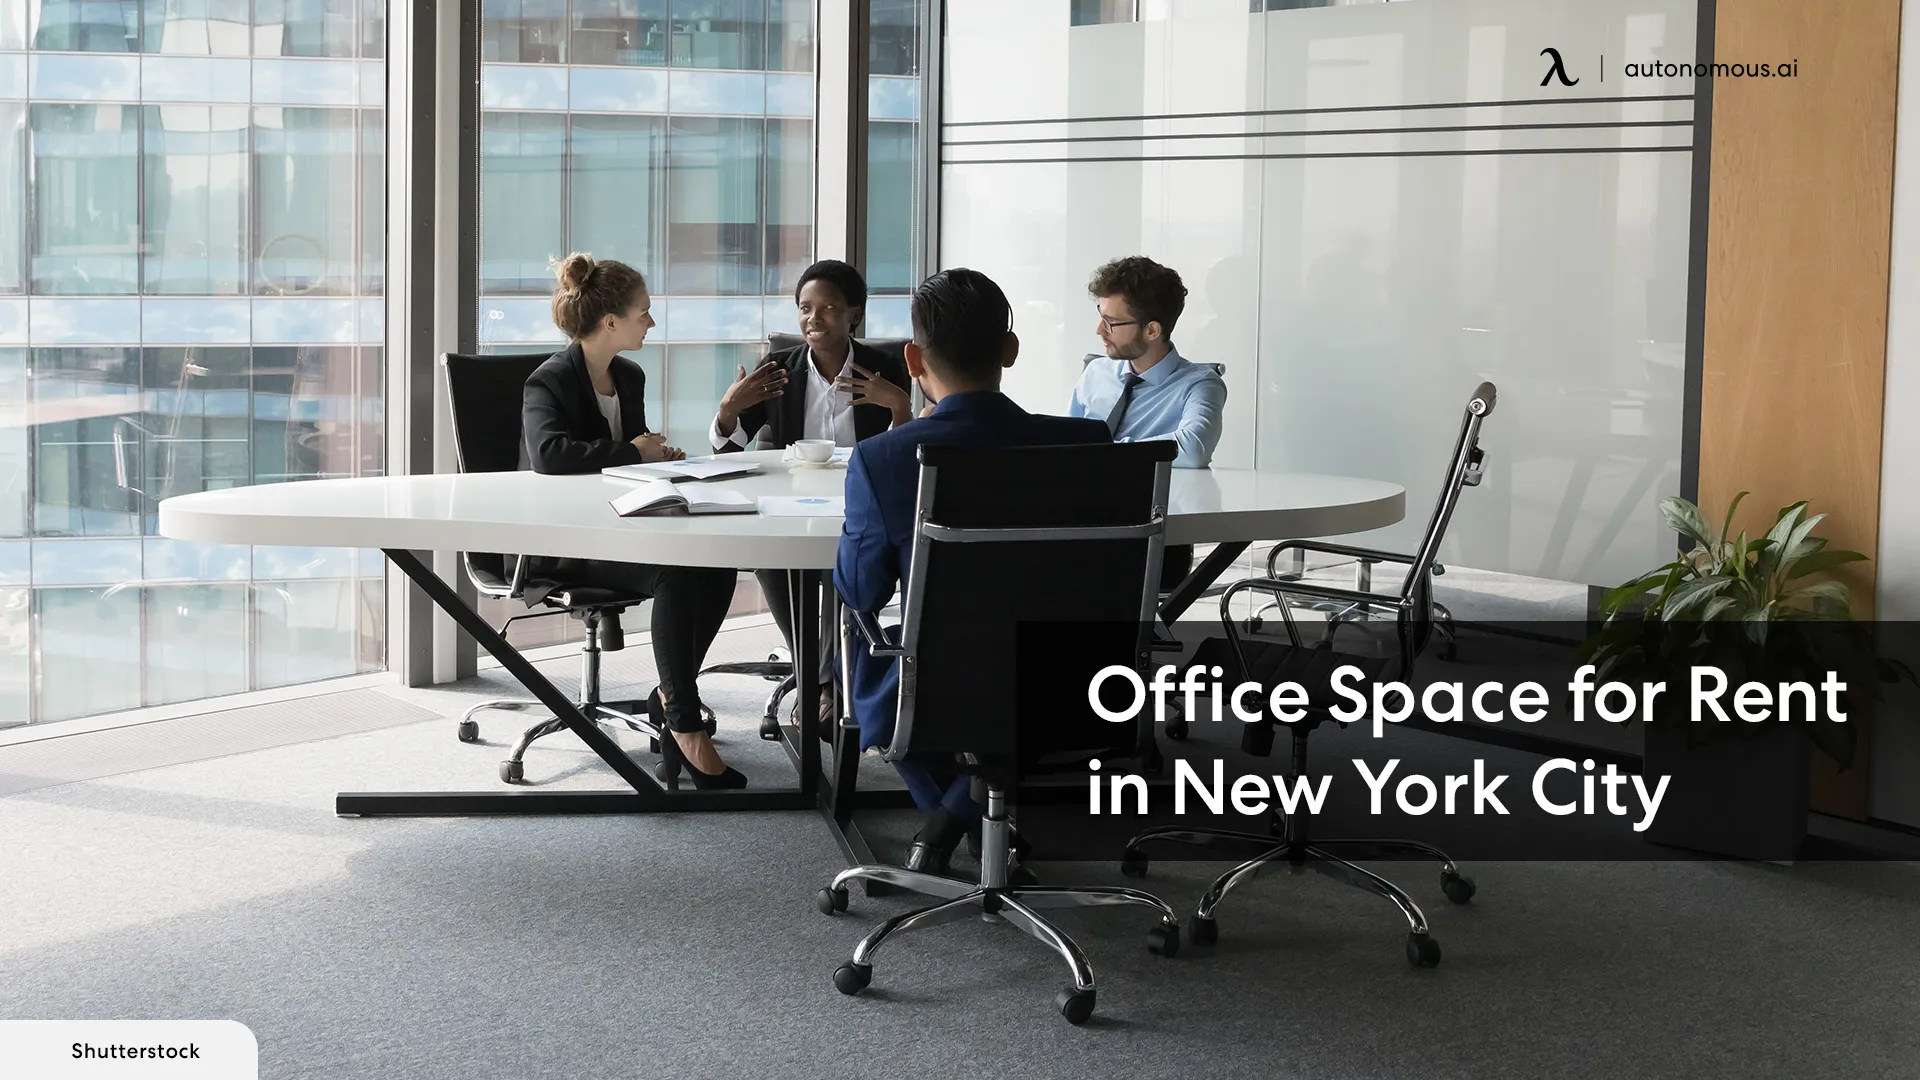 Choosing an Office Space for Rent in New York City